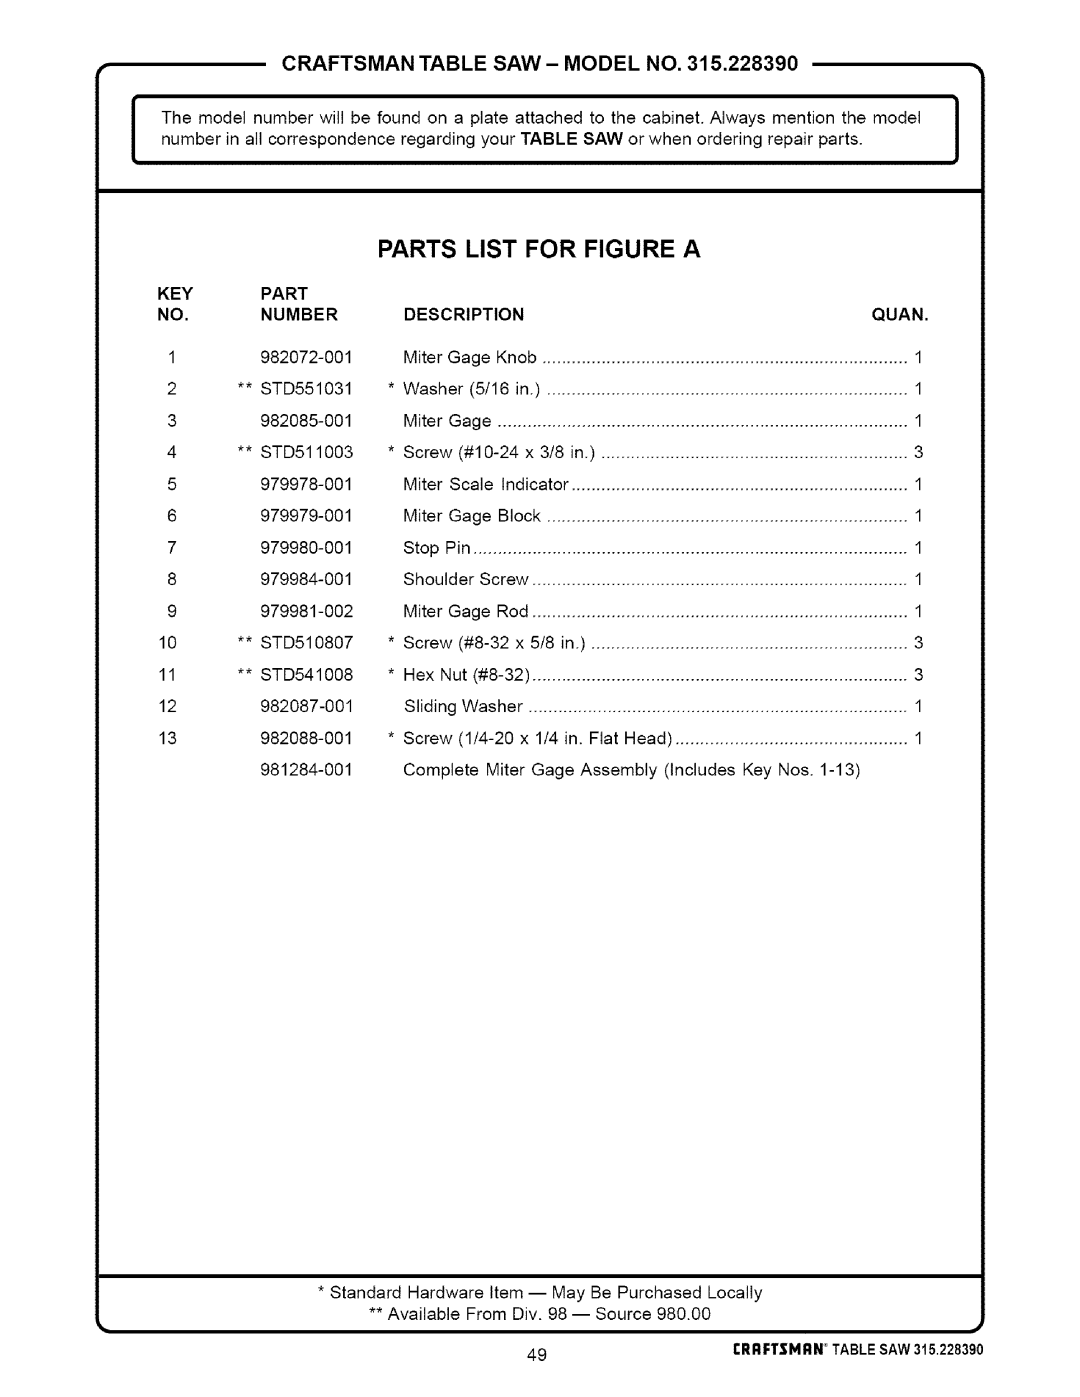 Craftsman 315.22839 owner manual Parts List For Figure A, Craftsman, Table Saw - Model, No. Number, Quan 